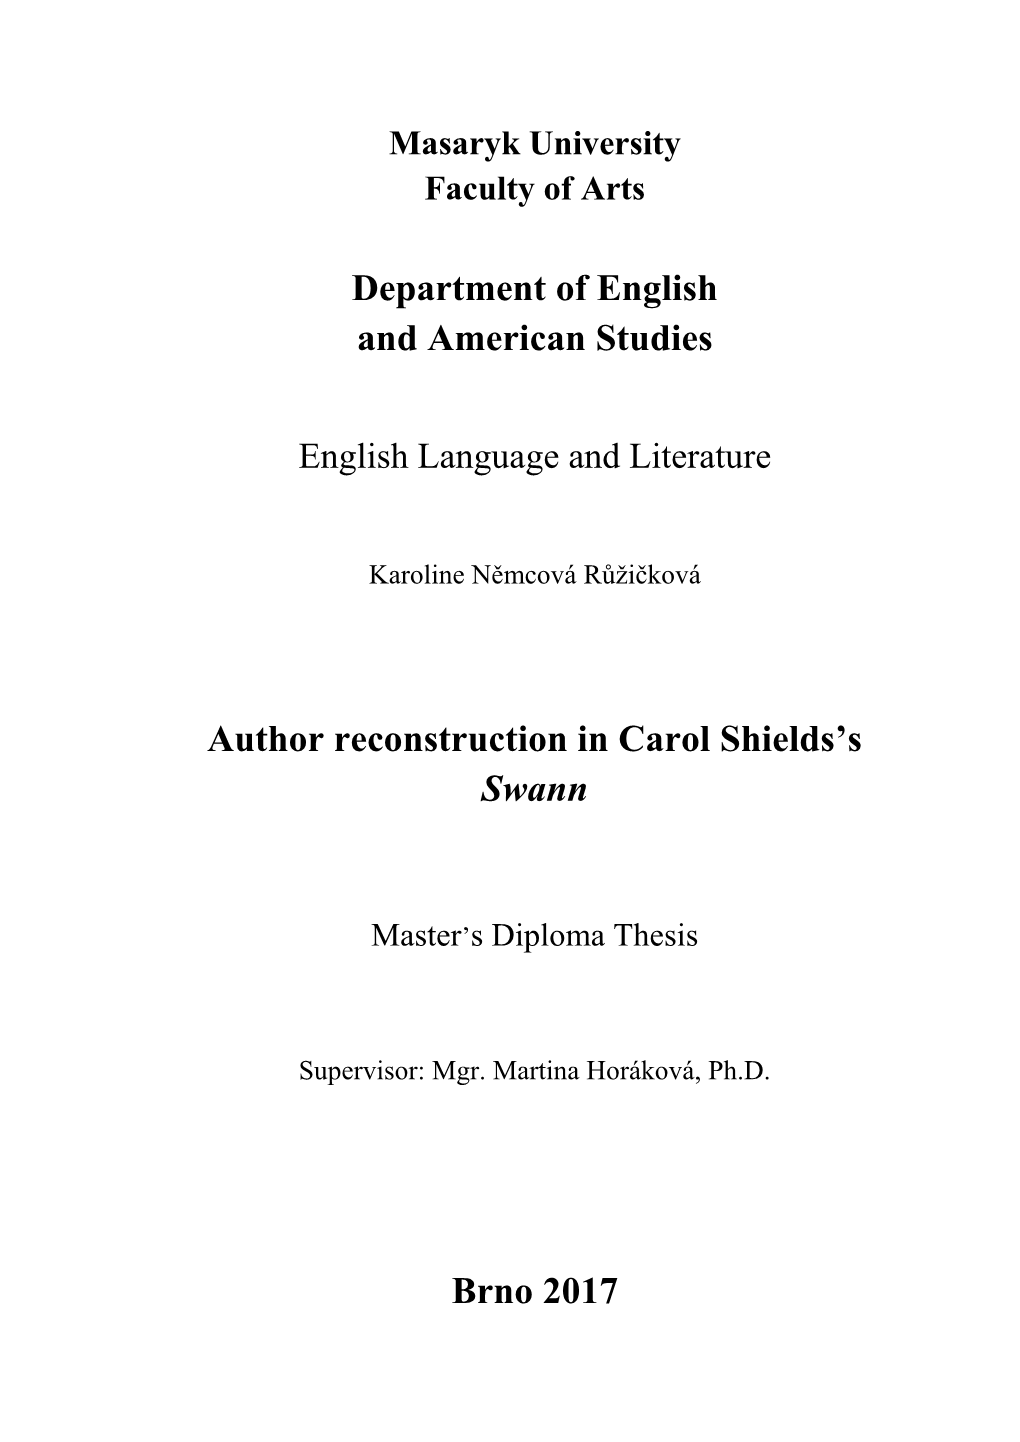 Department of English and American Studies Author Reconstruction In